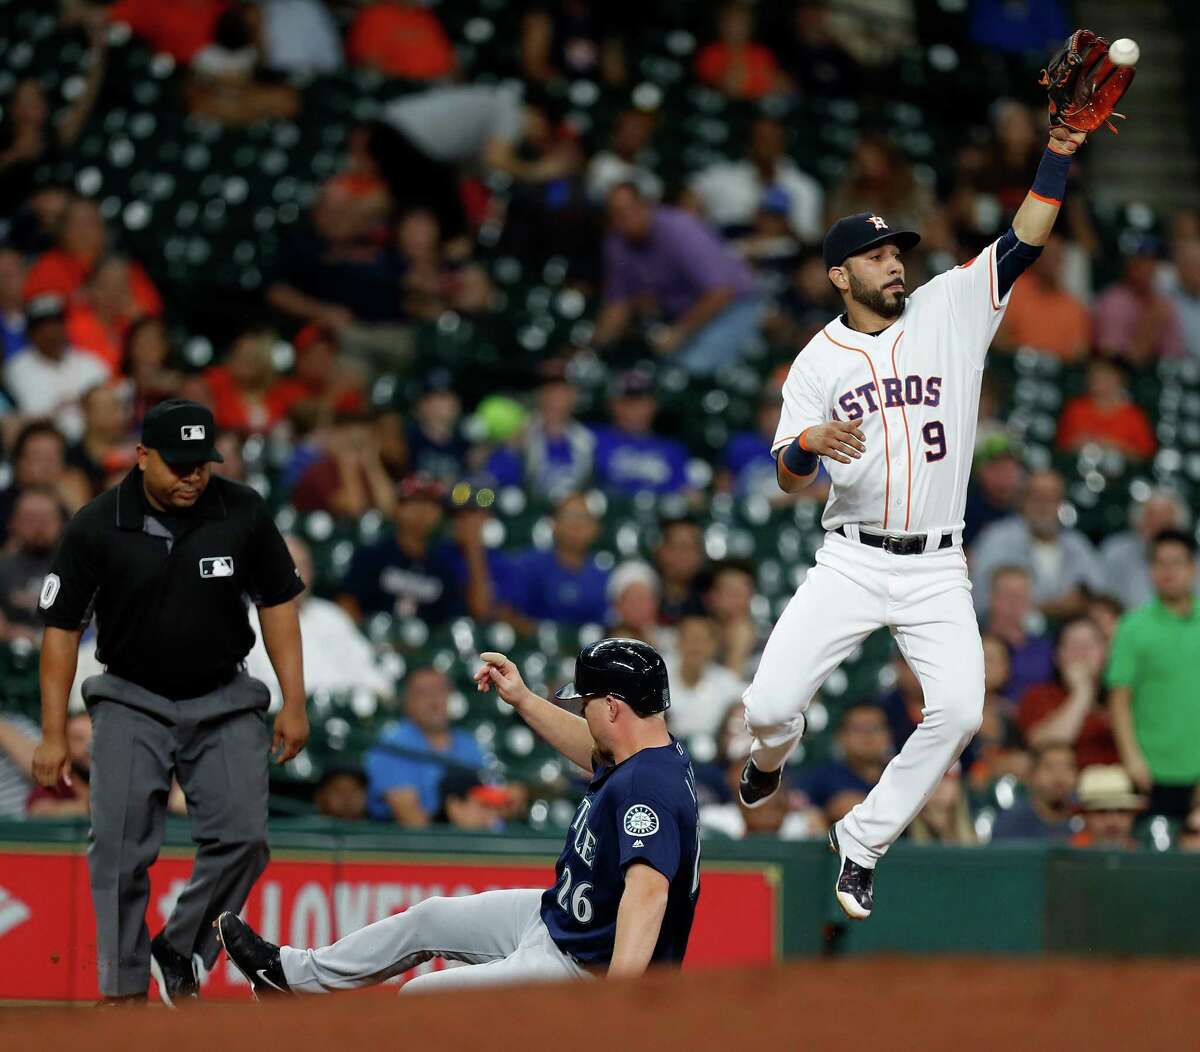 Houston Astros third baseman Marwin Gonzalez (9) tries to get the tag on Seattle Mariners Adam Lind (26) at third base in the second inning of an MLB game at Minute Maid Park, Monday, Sept. 26, 2016 in Houston.